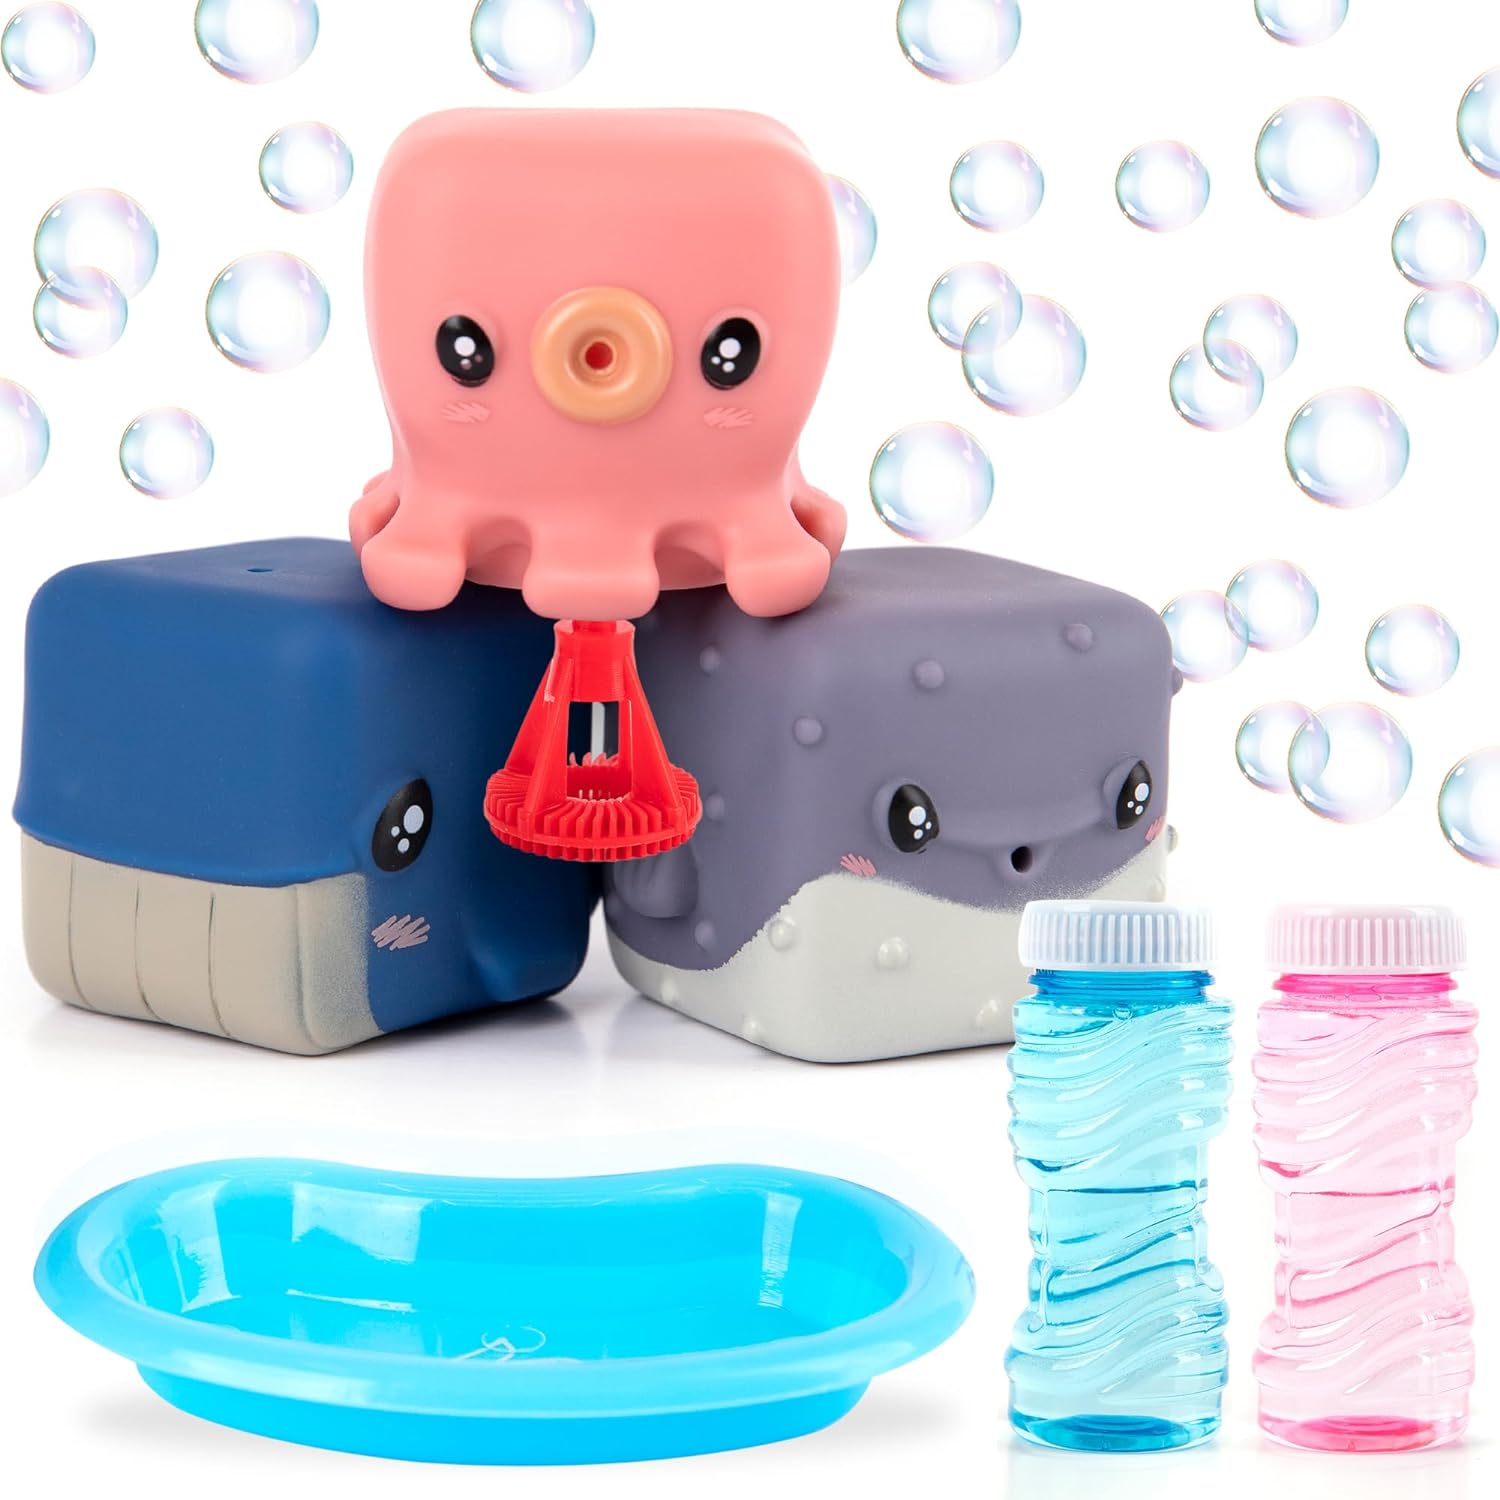 ArtCreativity Bubble Blowing Animals for Kids - Set of 3 - Animal Bubble Toys with 2 Bottles of Bubble Solution and Dipping Tray - Aquatic Party Favors for Kids - Under The Sea Party Supplies